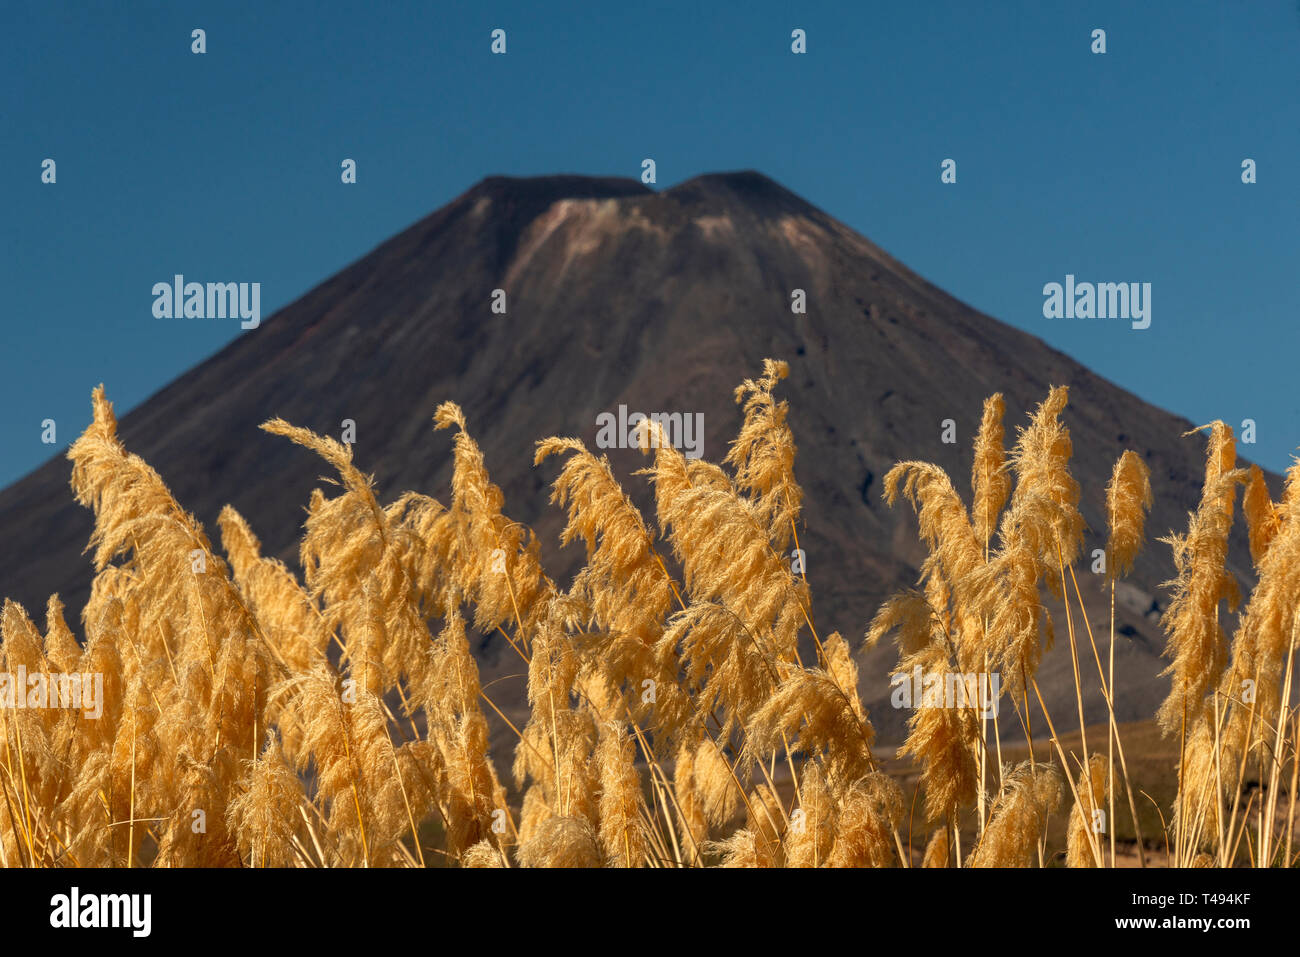 New Zealand native Toetoe grass, with the volcanic cinder cone of Mount Nguaruhoe (Mt Doom in Lord of the Rings) in the background. Stock Photo